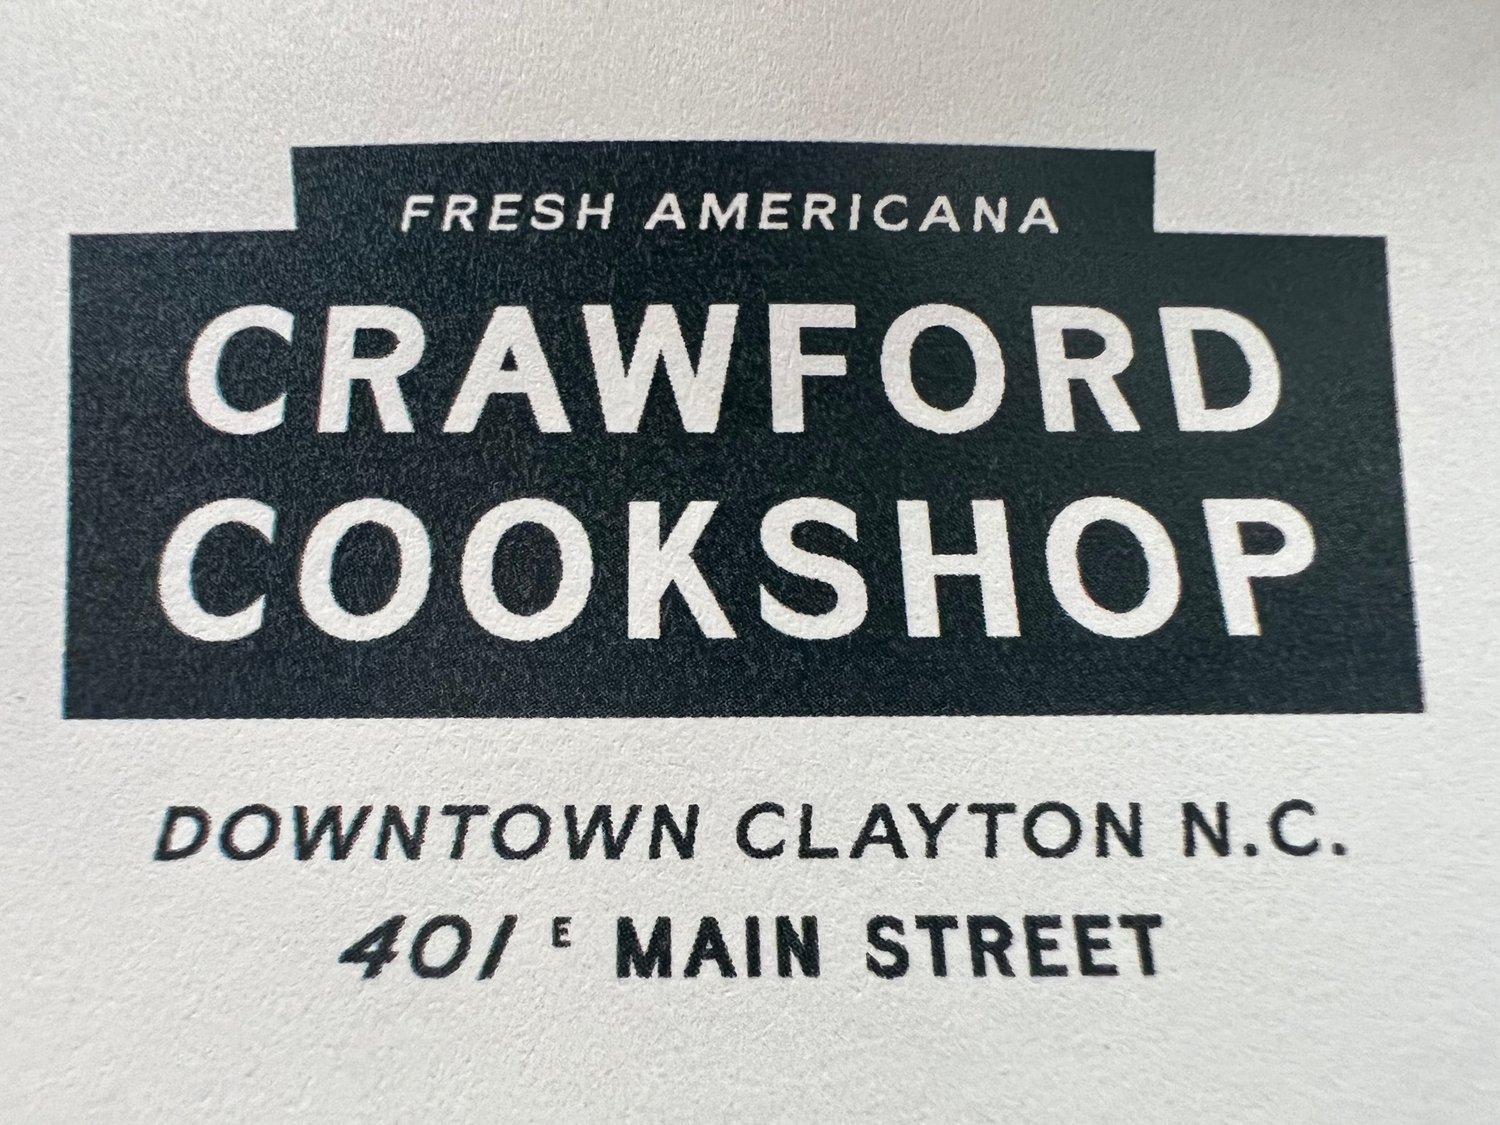 Crawford Cookshop is at 401 E. Main St. in Clayton.